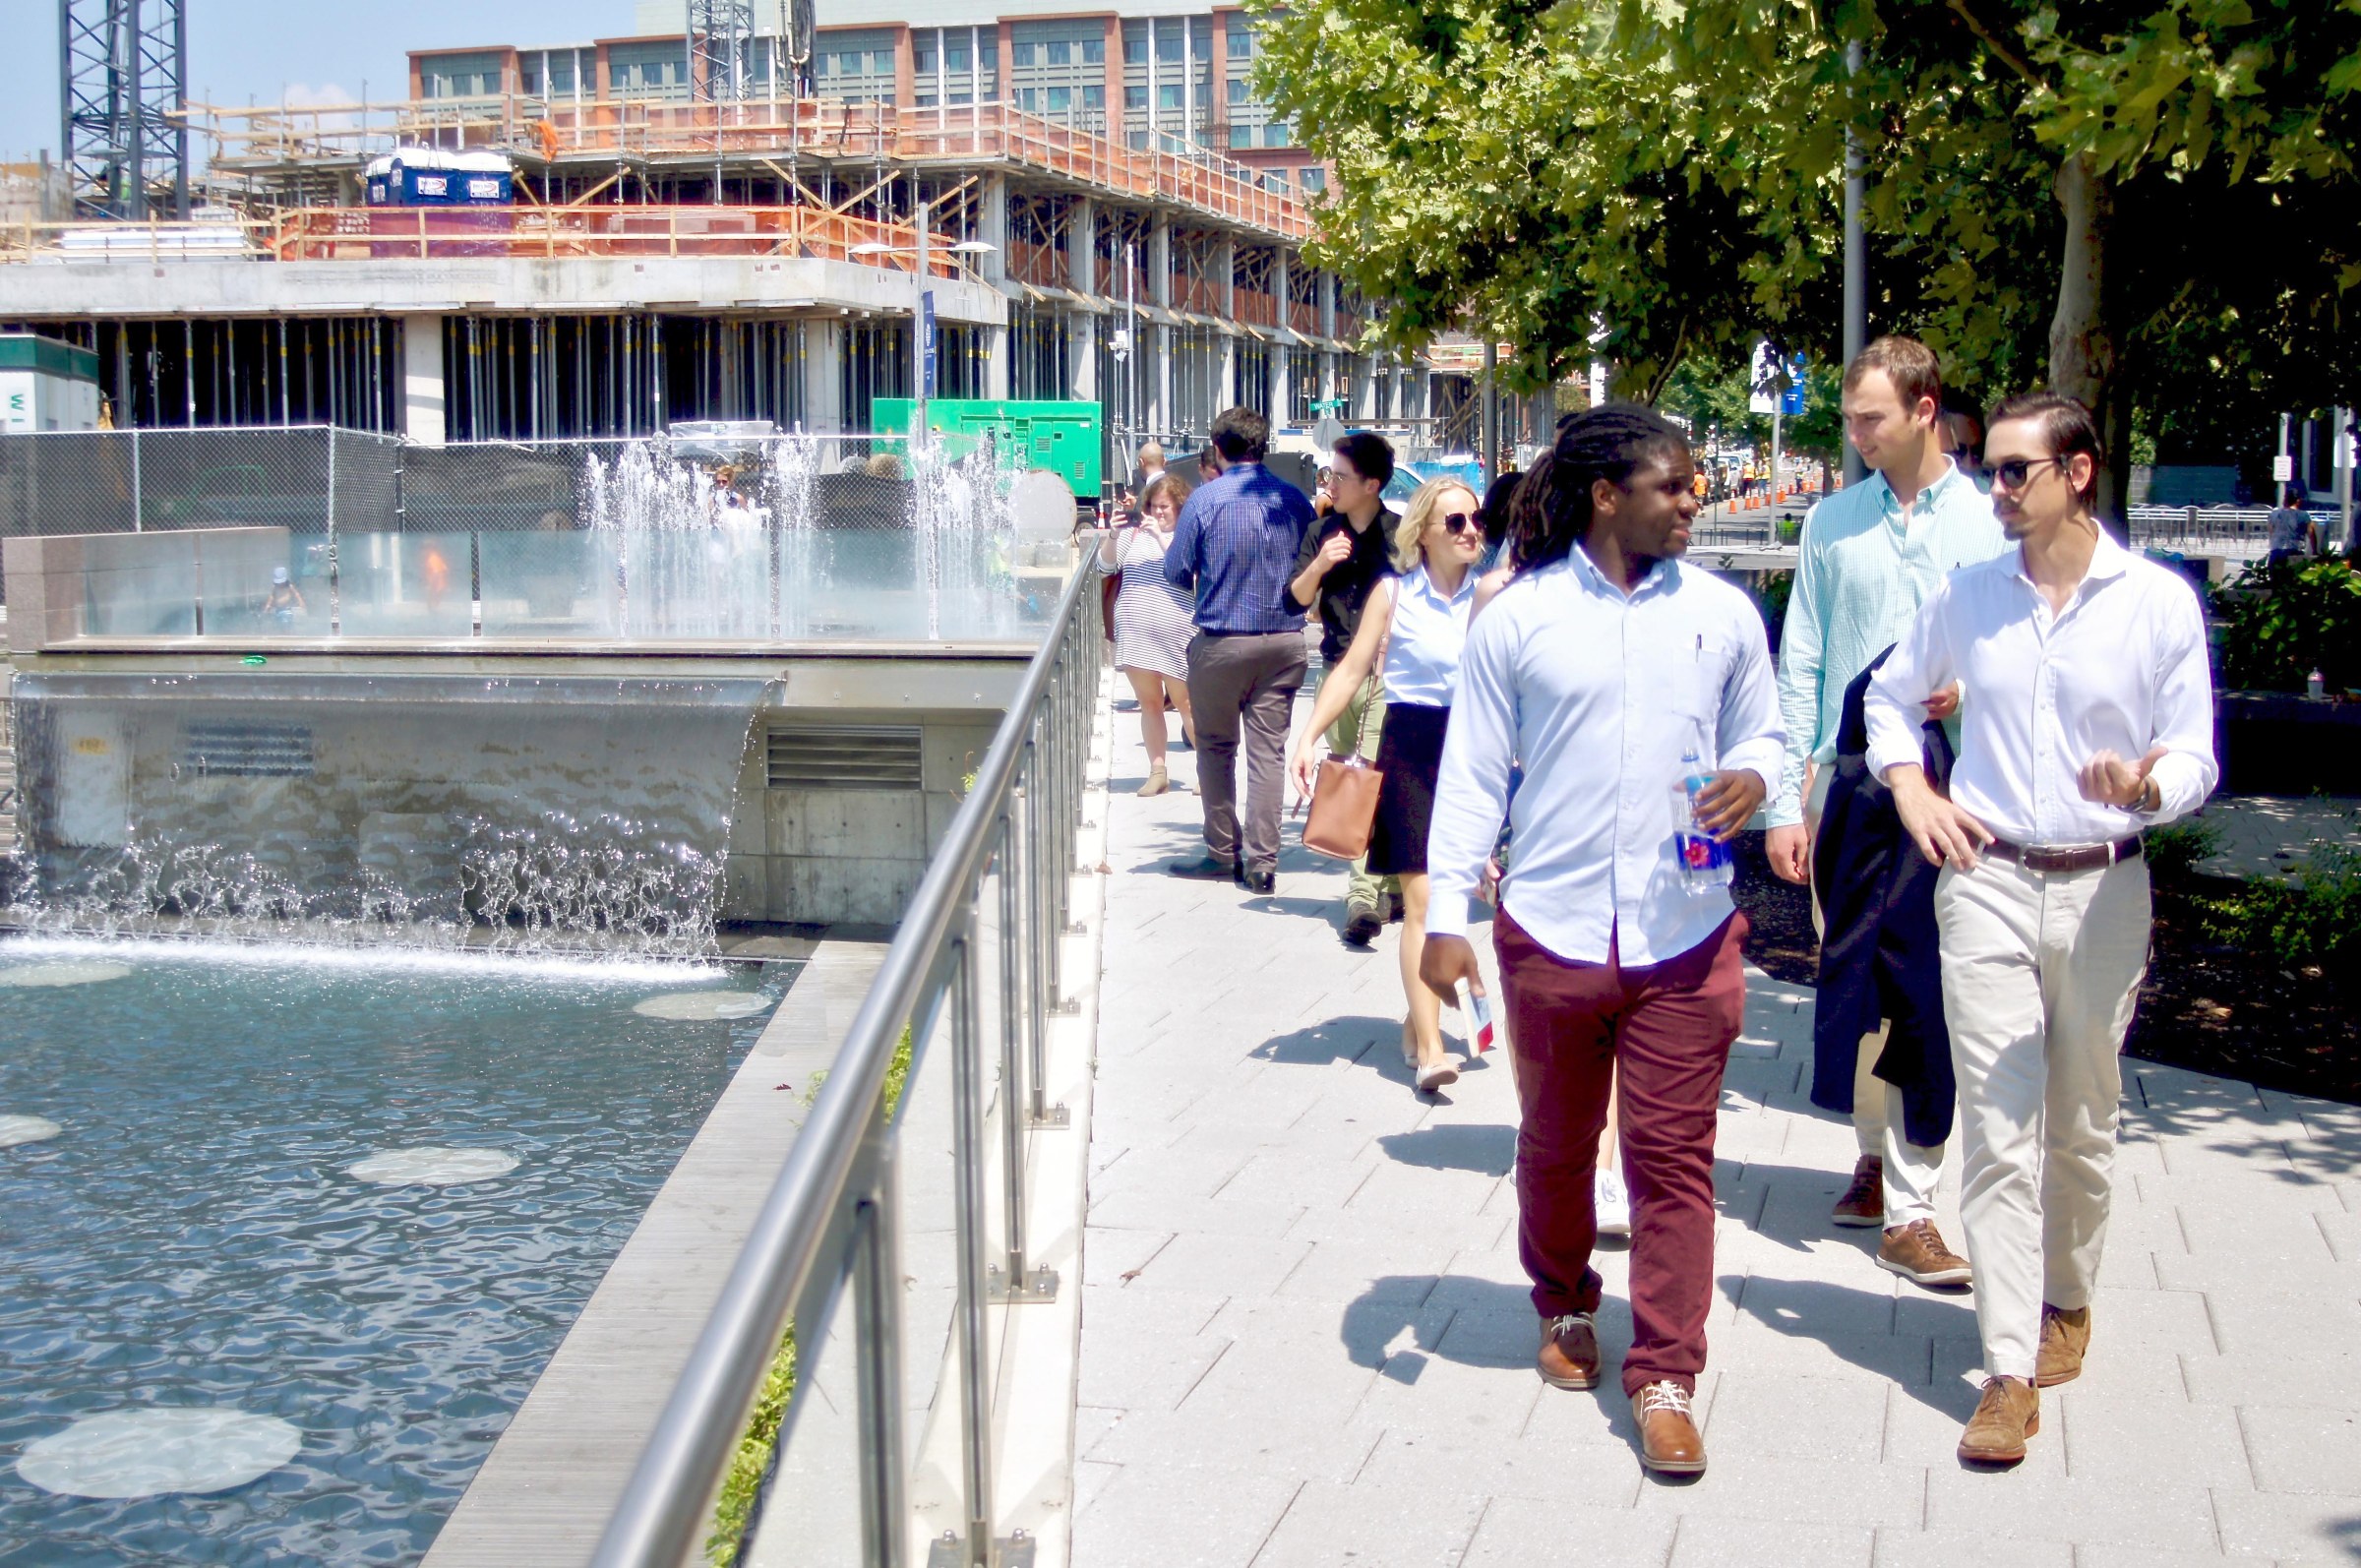 Group of people walking alongside a water feature with construction in the background